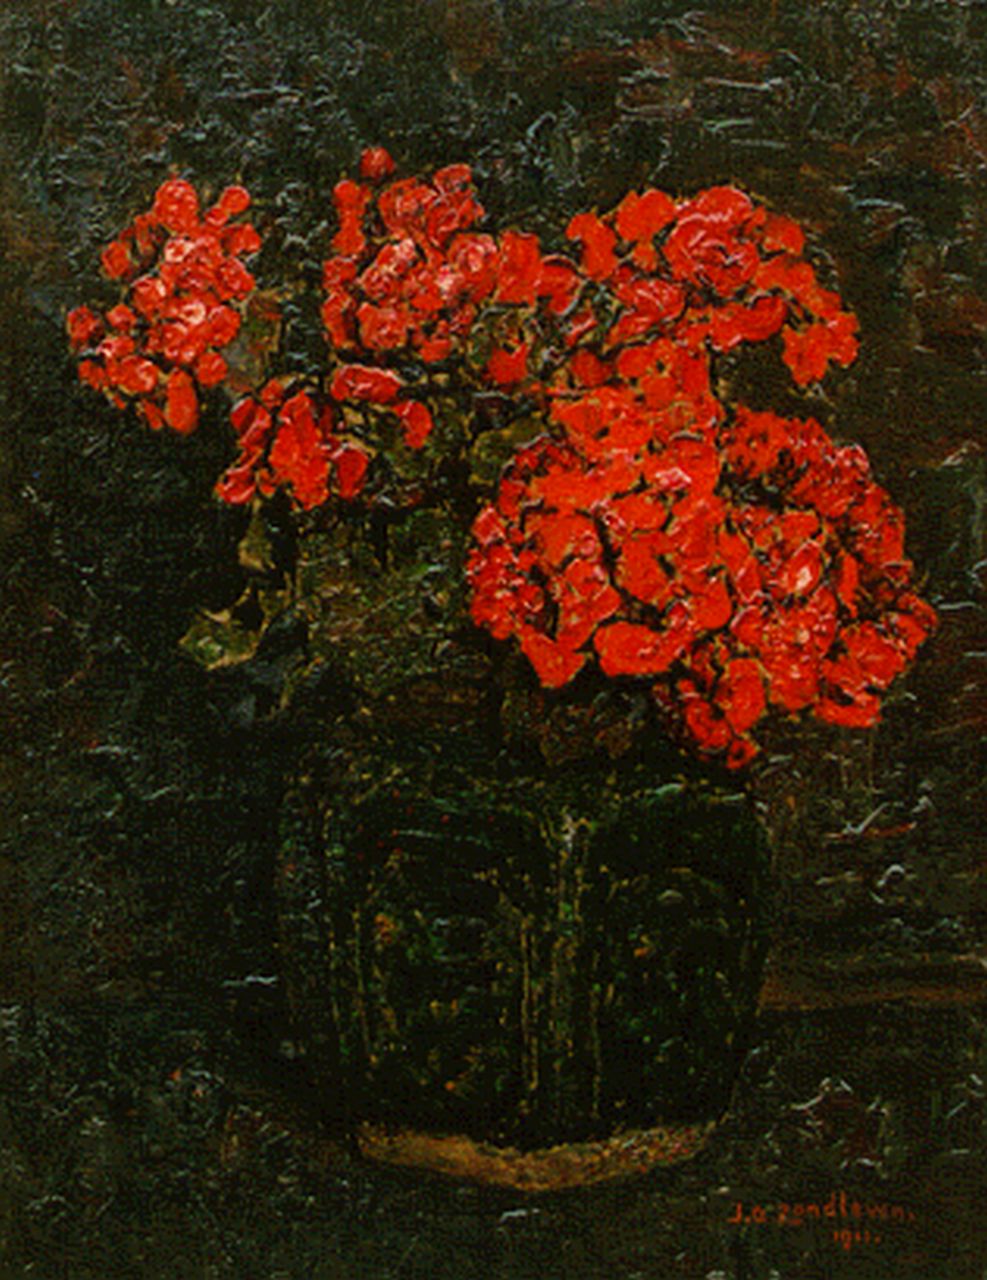 Zandleven J.A.  | Jan Adam Zandleven, A ginger-jar with chrysanthemums, oil on canvas laid down on panel 40.8 x 31.5 cm, signed l.r. and dated 1911